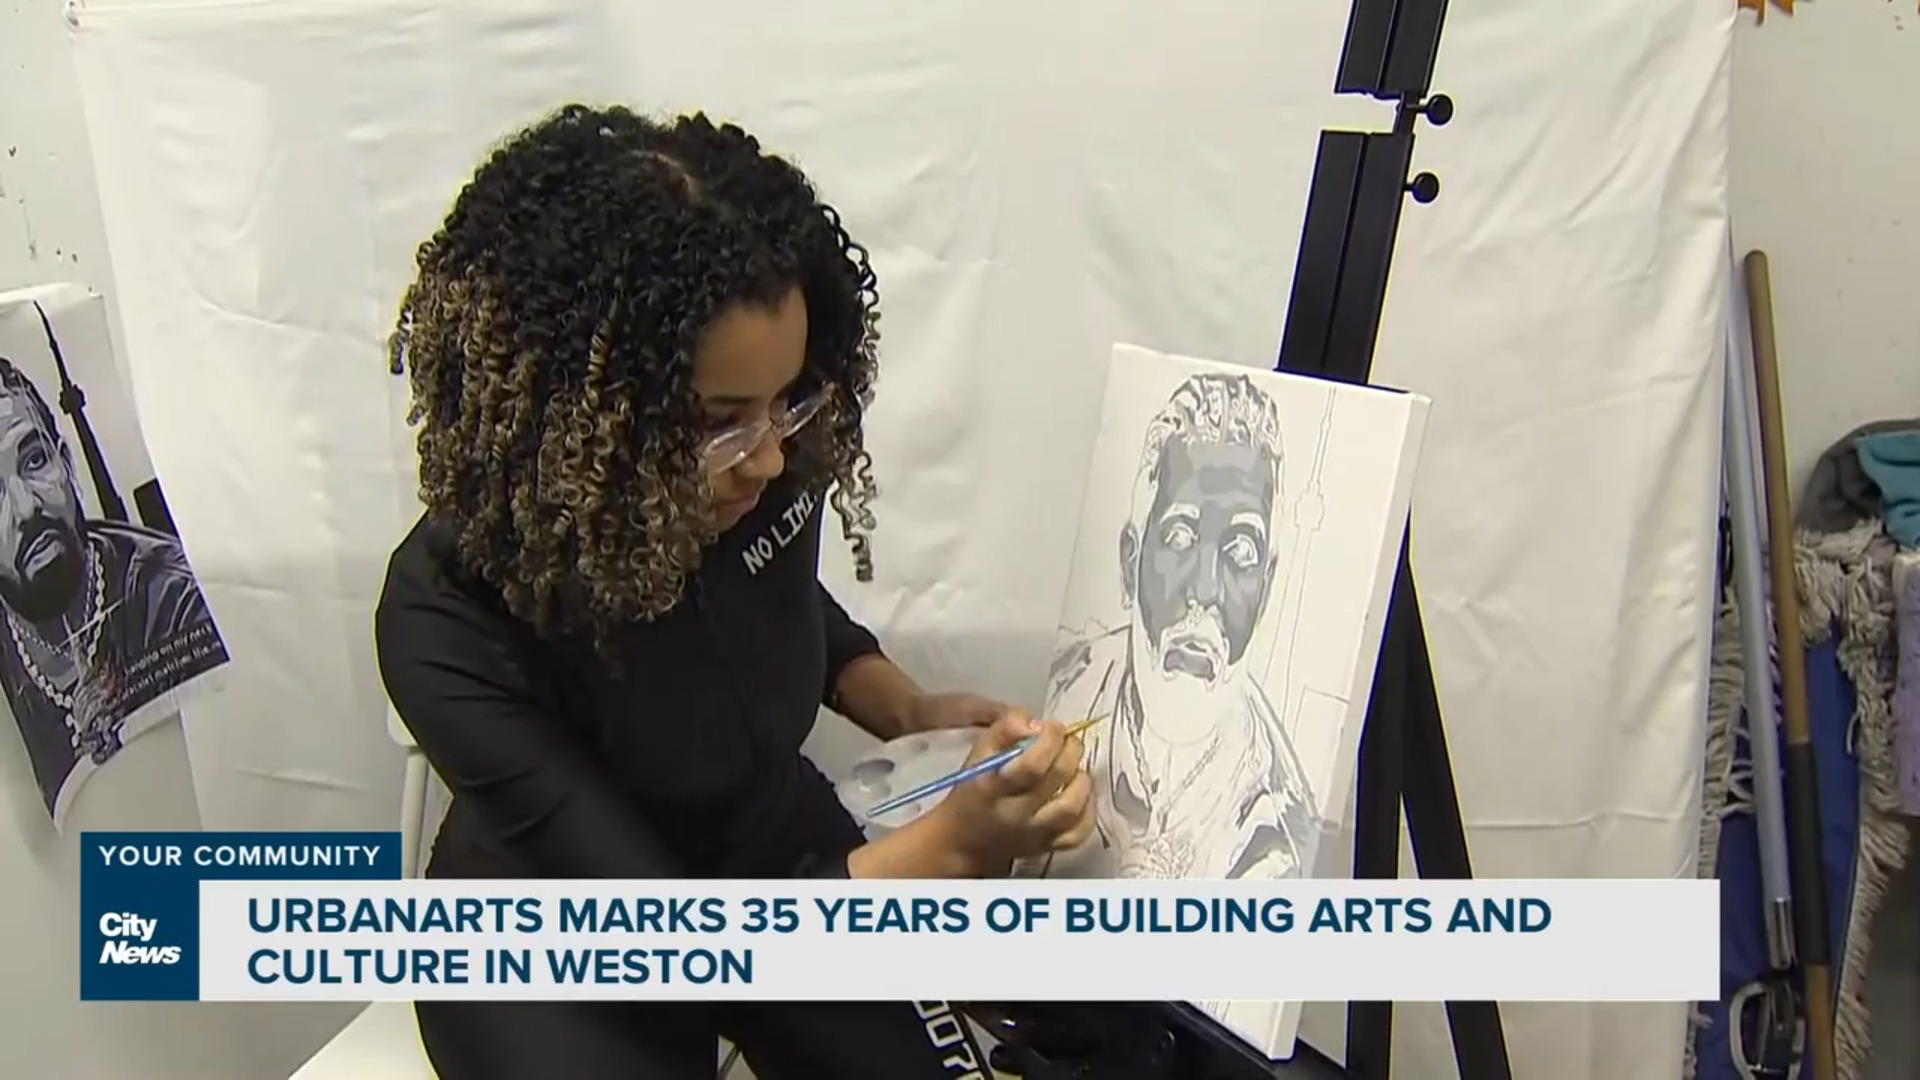 Urbanarts marks 35 years of arts and culture